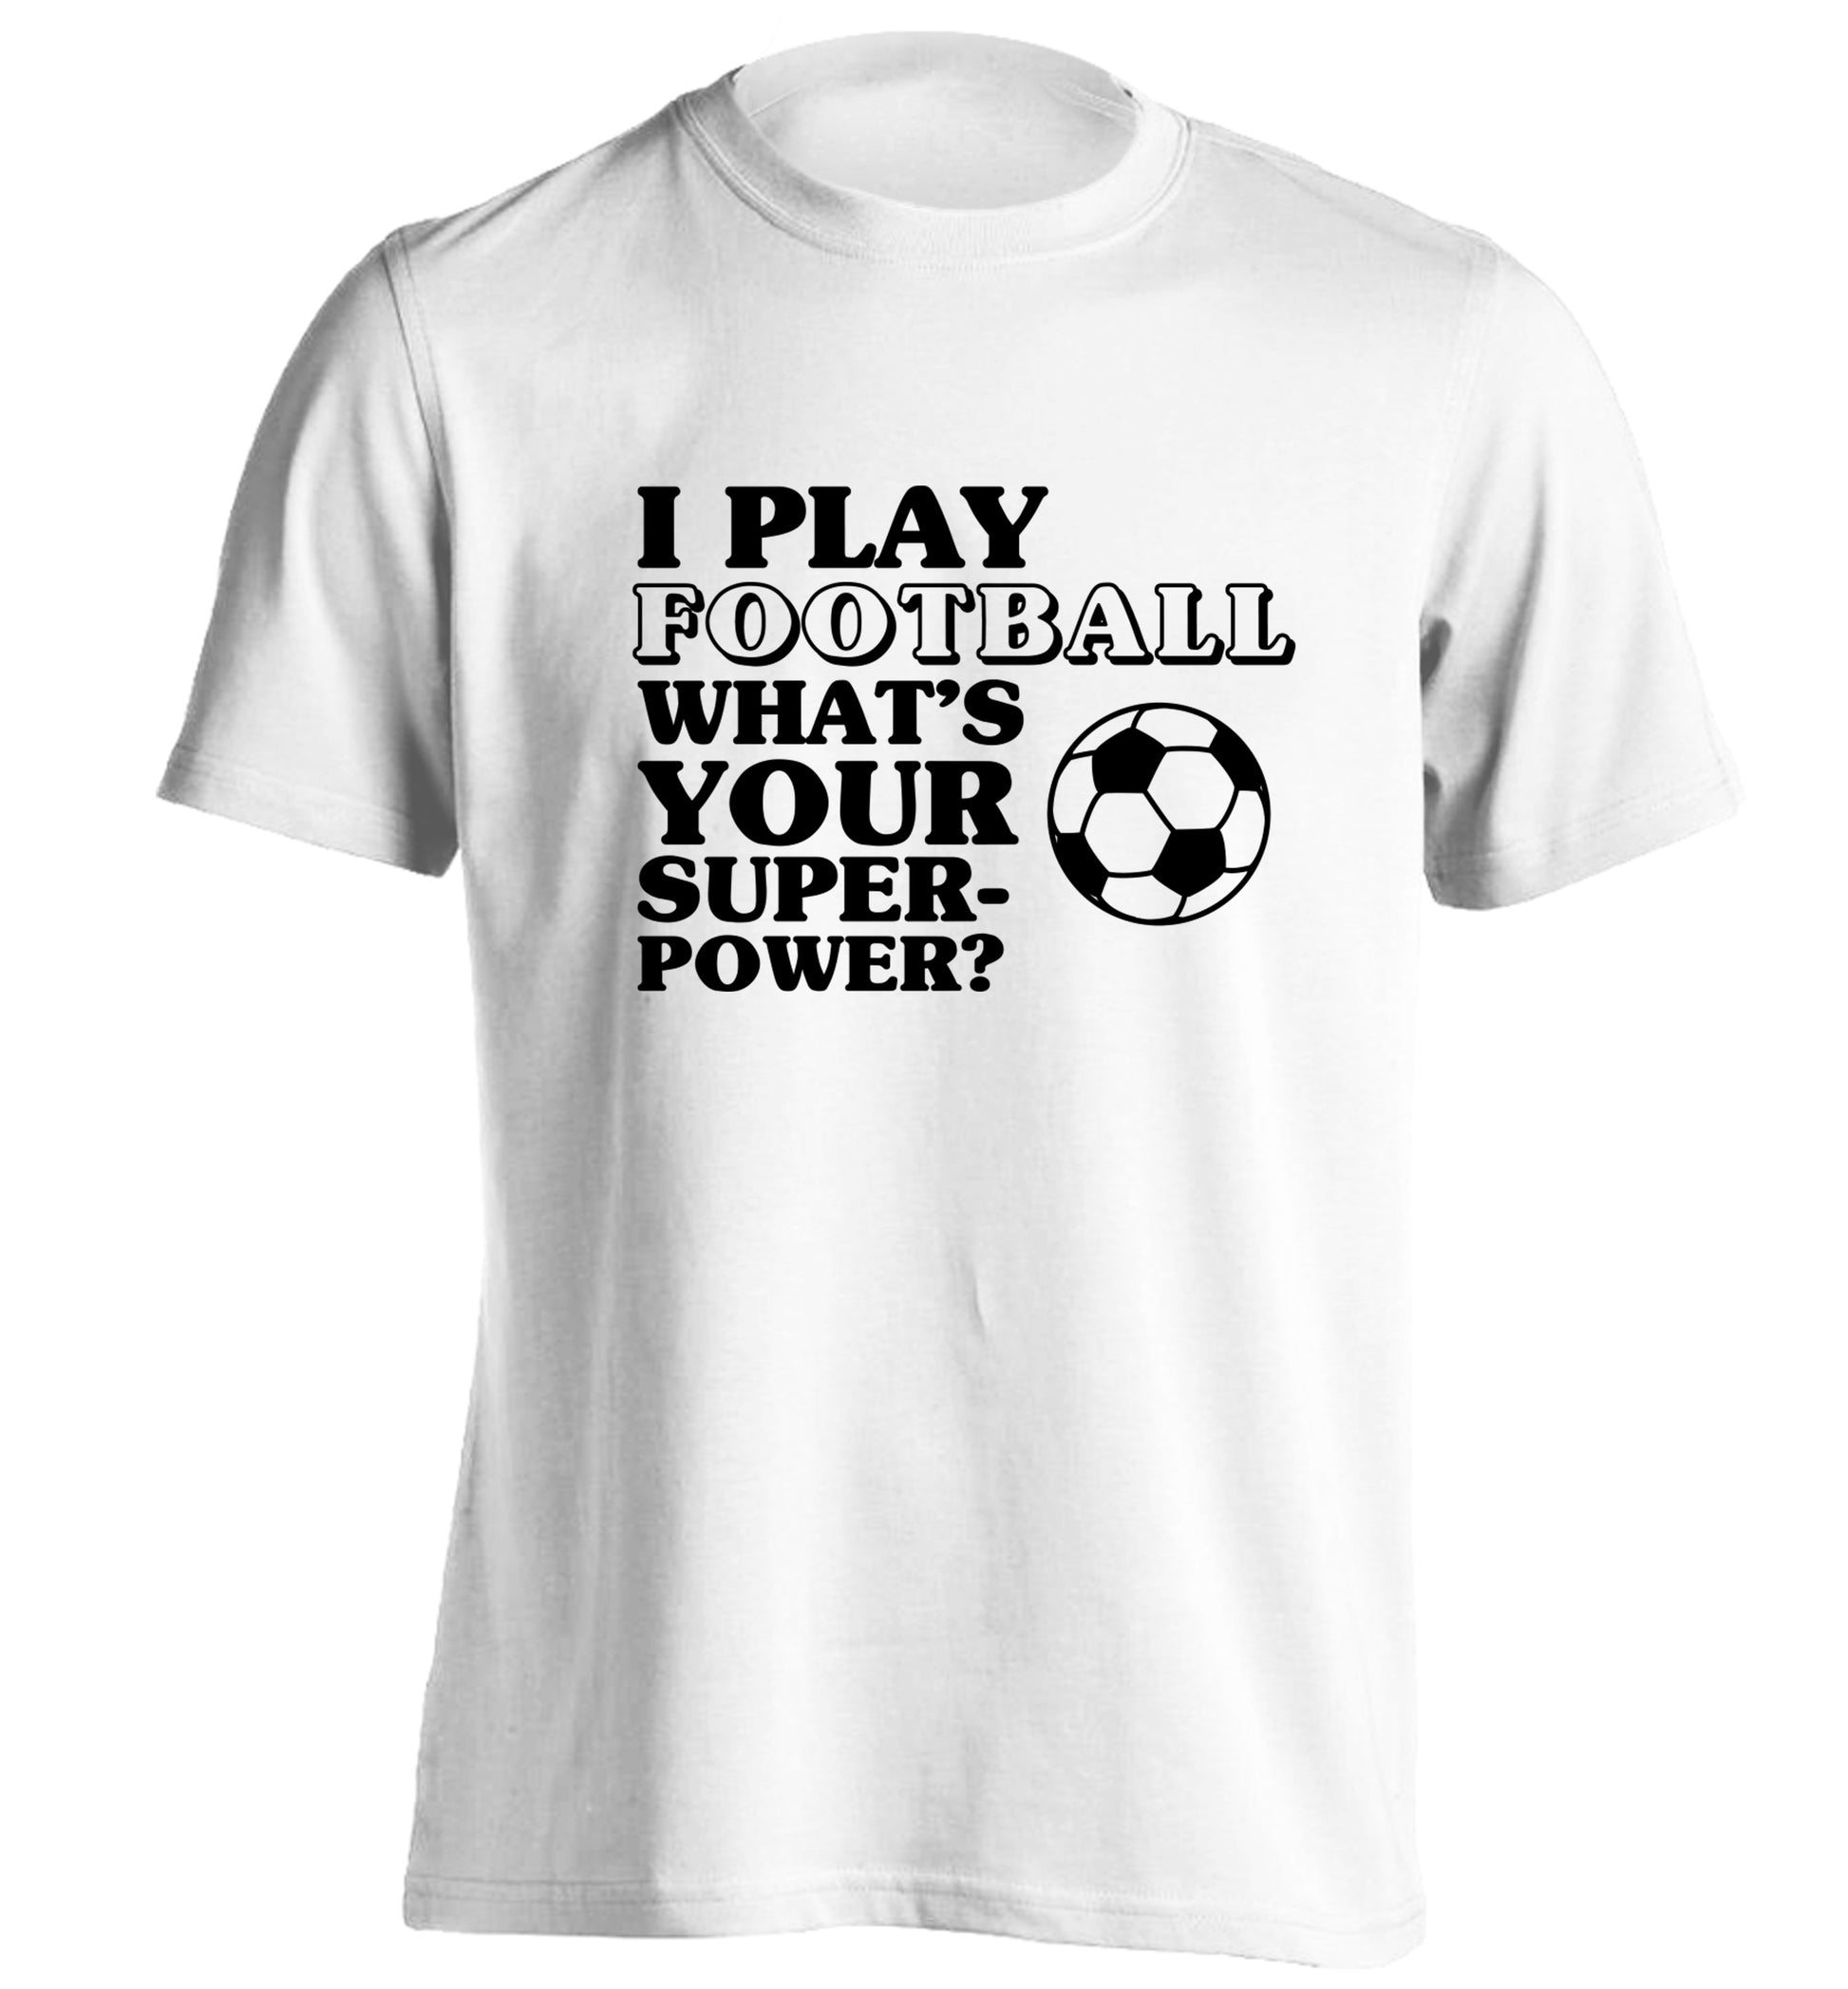 I play football what's your superpower? adults unisexwhite Tshirt 2XL